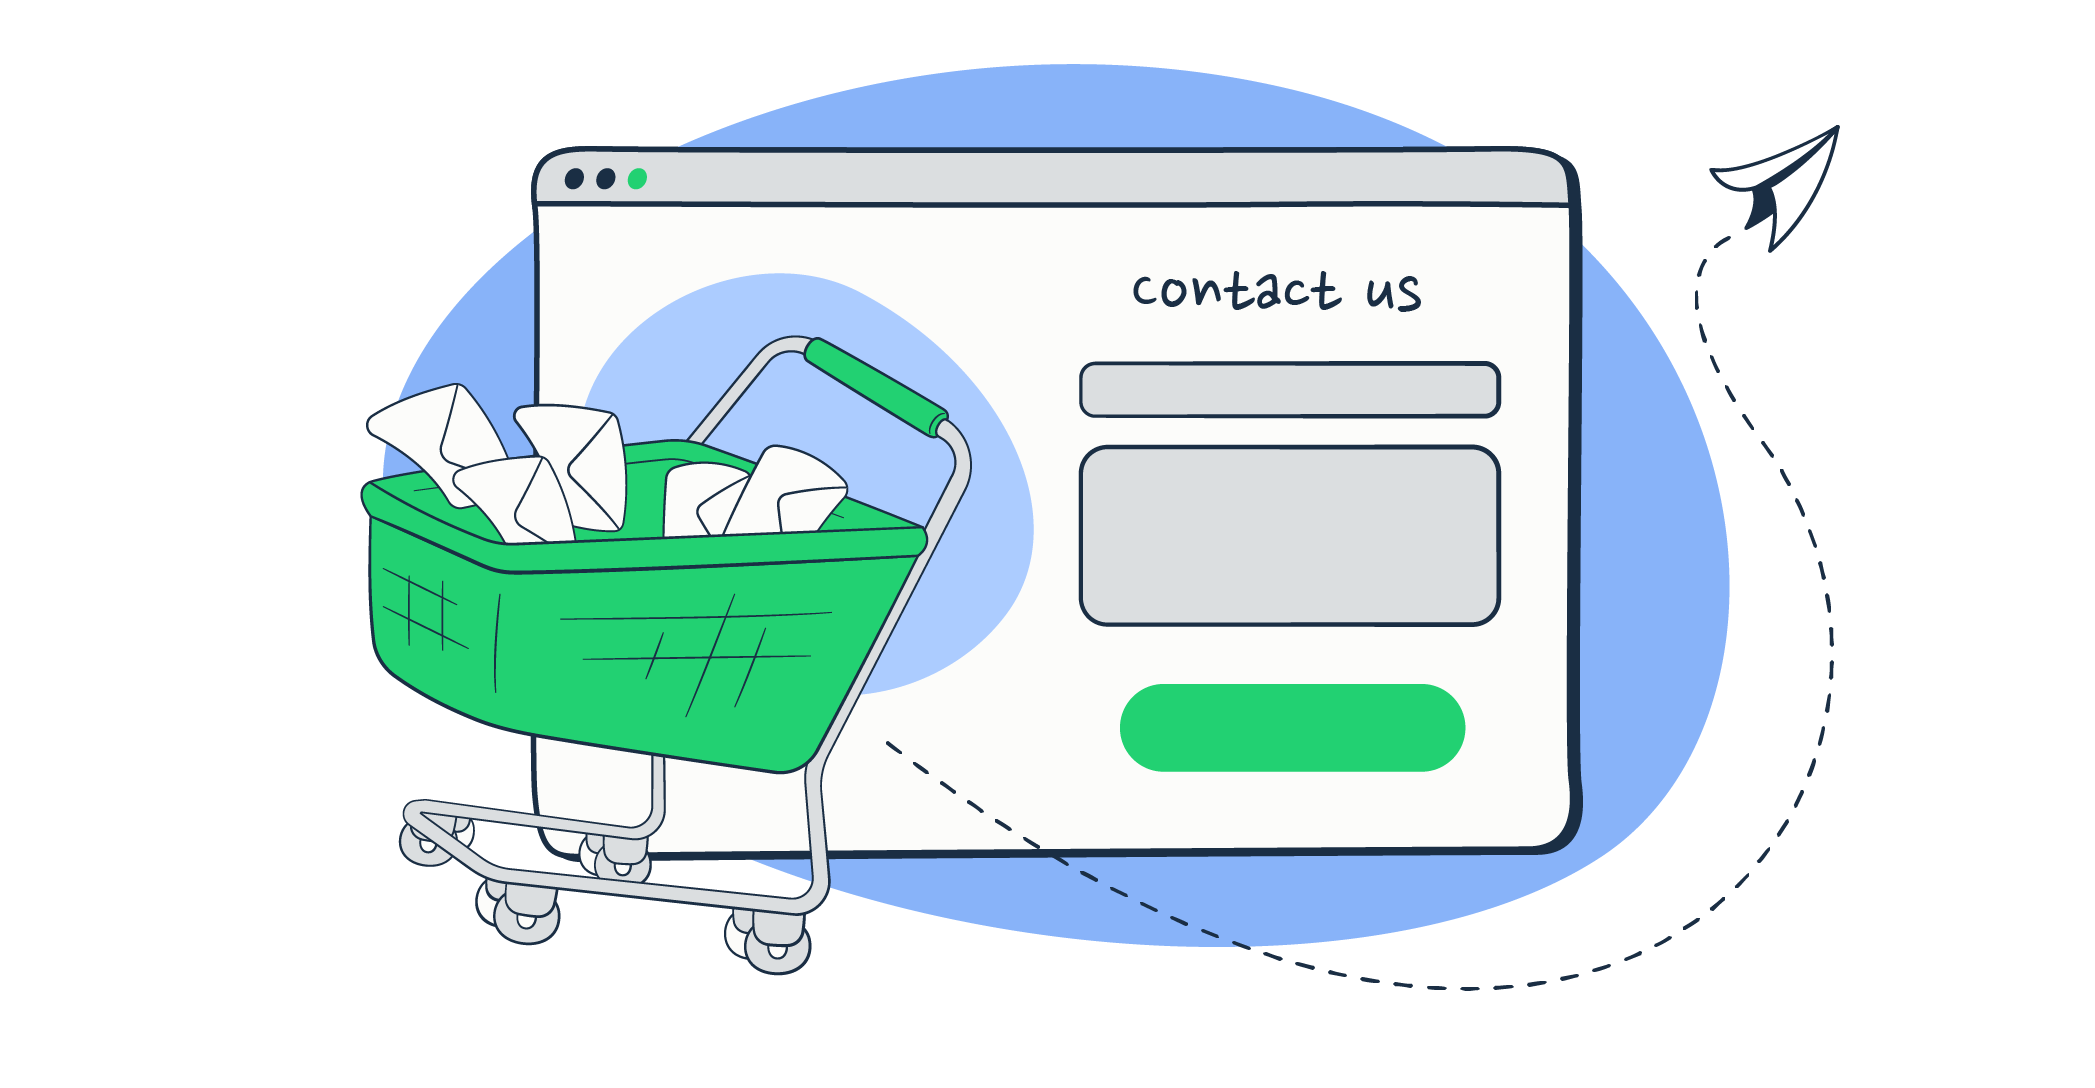 This is a cover image for an article that covers in detail how to set up a Shopify Contact Form